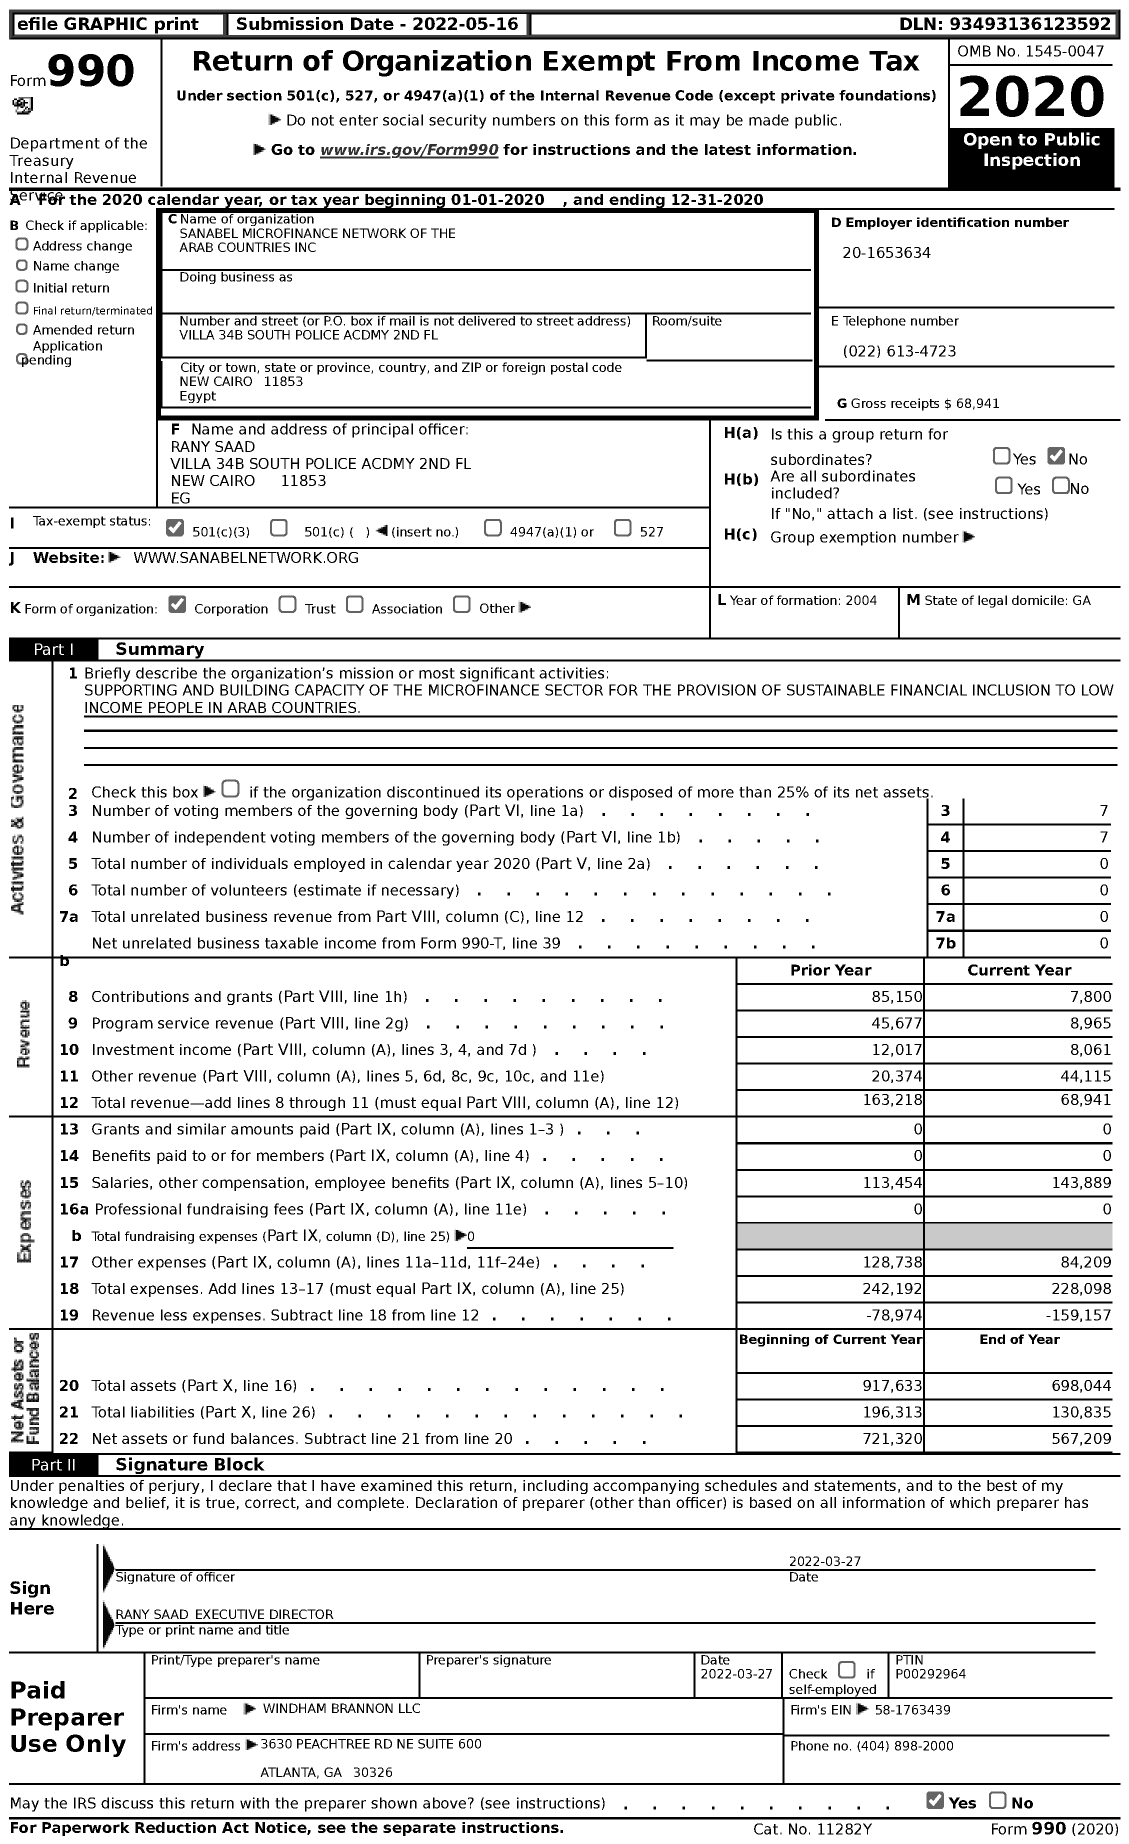 Image of first page of 2020 Form 990 for Sanabel Microfinance Network of the Arab Countries